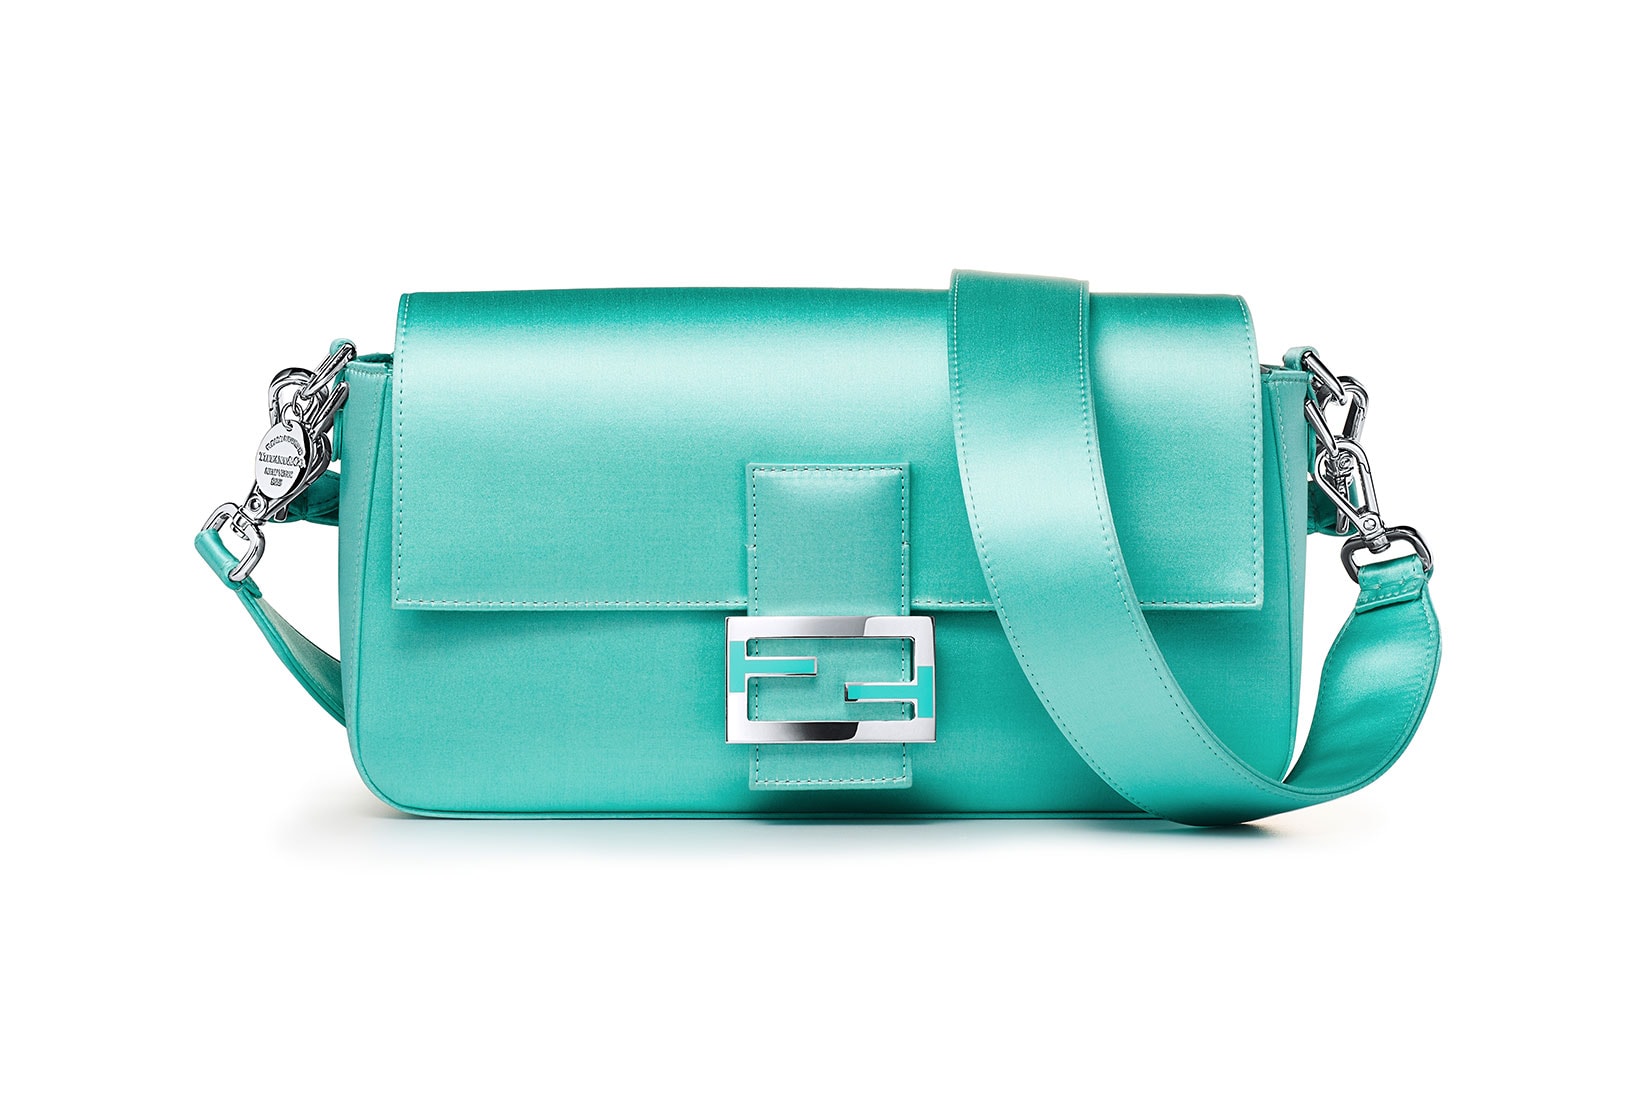 Fendi Tiffany Co Blue Baguette Handbags Hand in Hand Makers Collaboration Release Price Where to buy